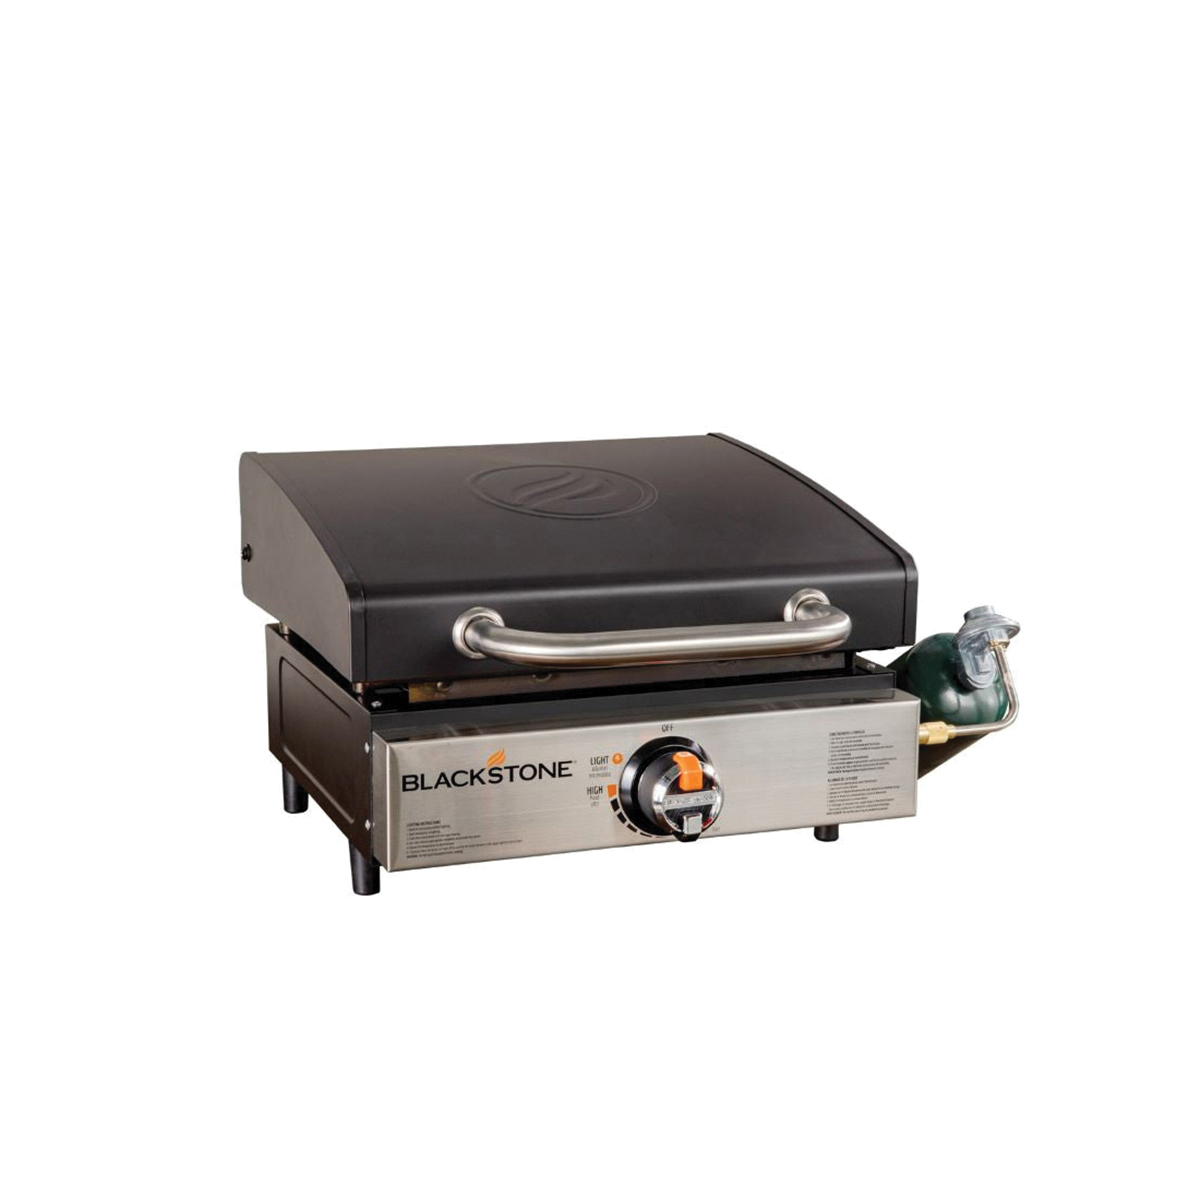 Outdoor Portable Propane GAS Griddle Grill - 13,000 BTU | Camplux